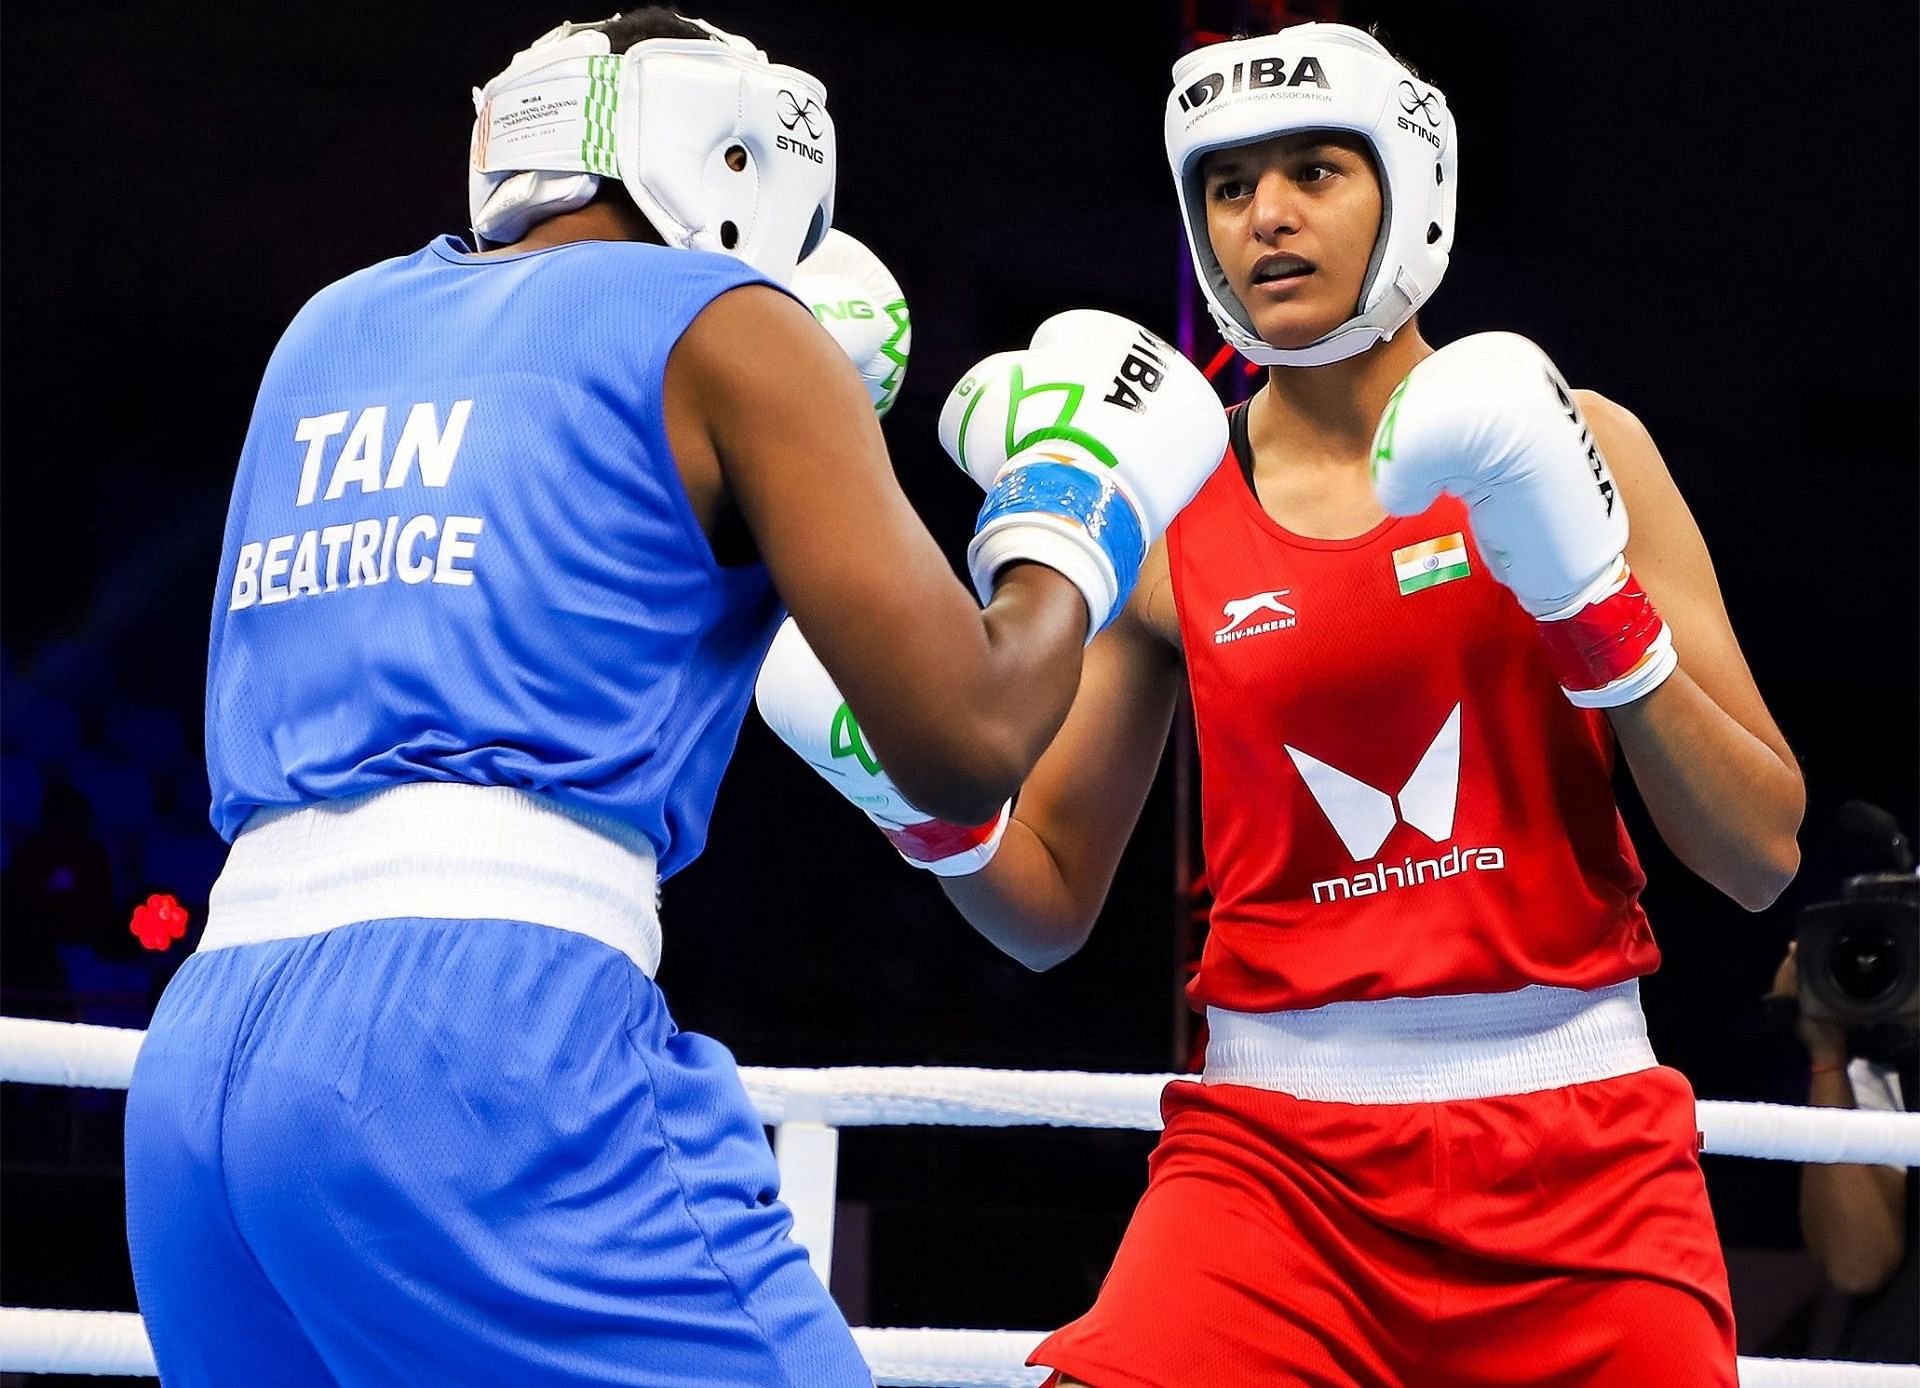 Jasmine Lamboria in action during IBA Women&rsquo;s World Boxing Championships on Friday. Photo credit Boxing Federation of India.